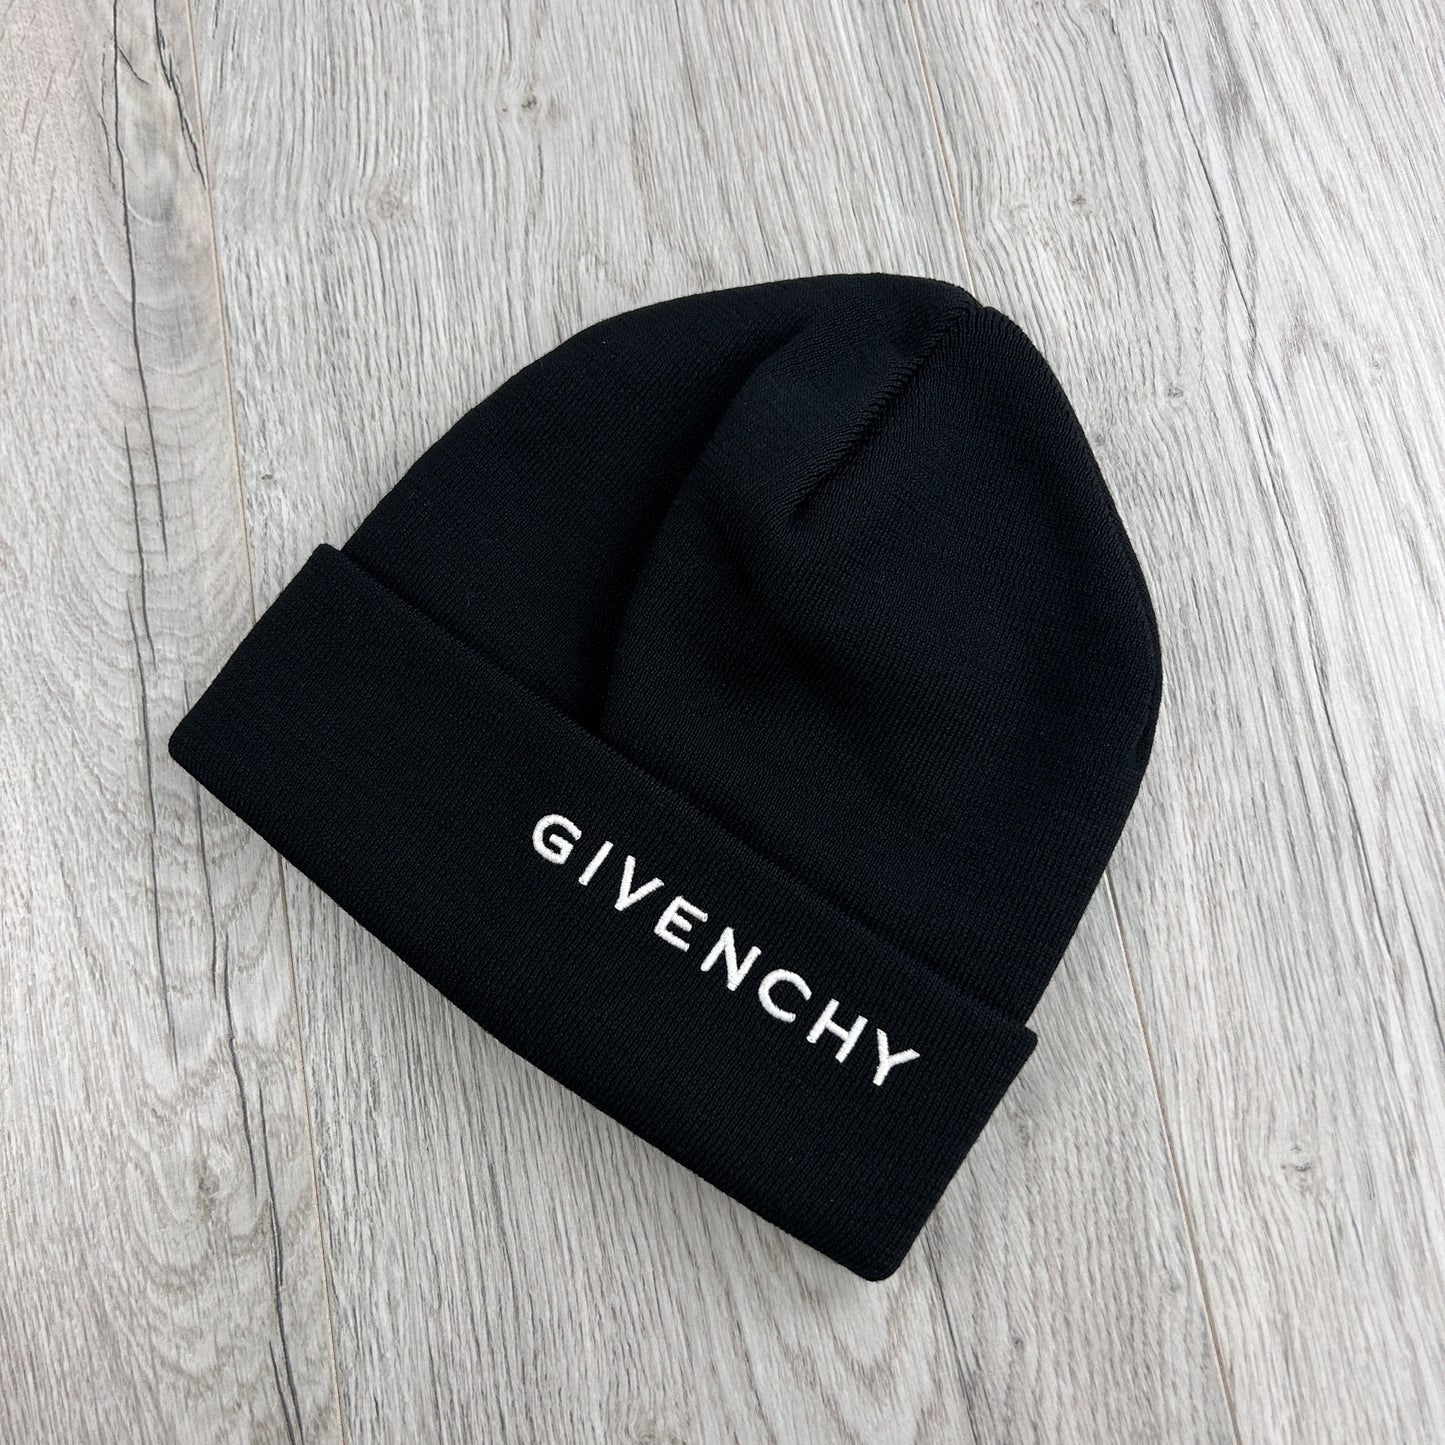 Givenchy Men’s Black Embroidered Logo Beanie